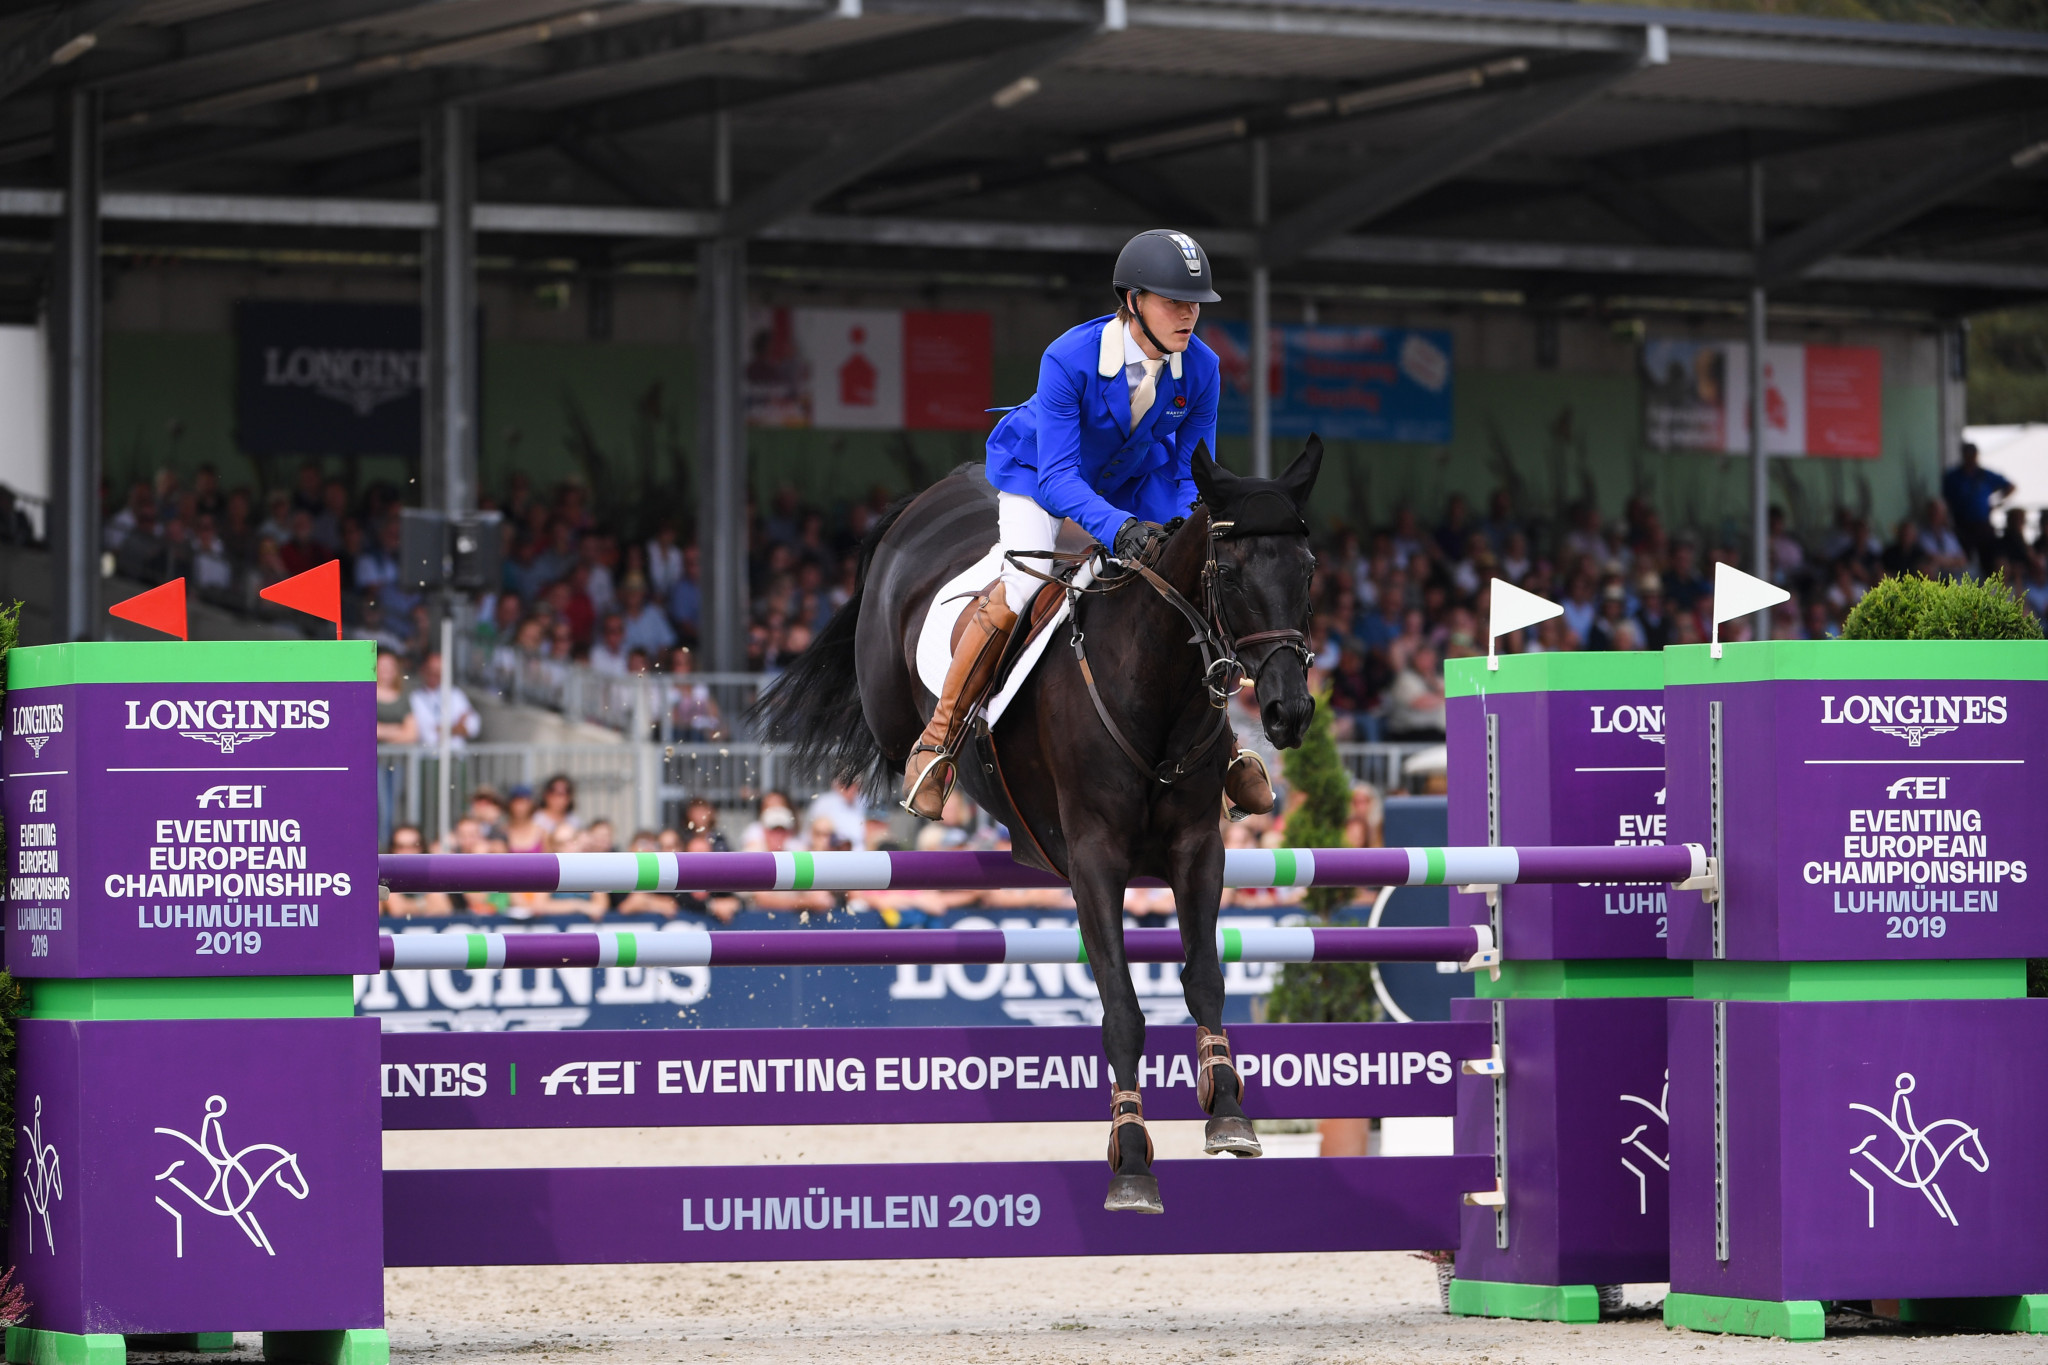 Avenches saw off competition from Boekelo and Montelibretti to secure the hosting rights for this year's FEI Evening European Championships ©Getty Images